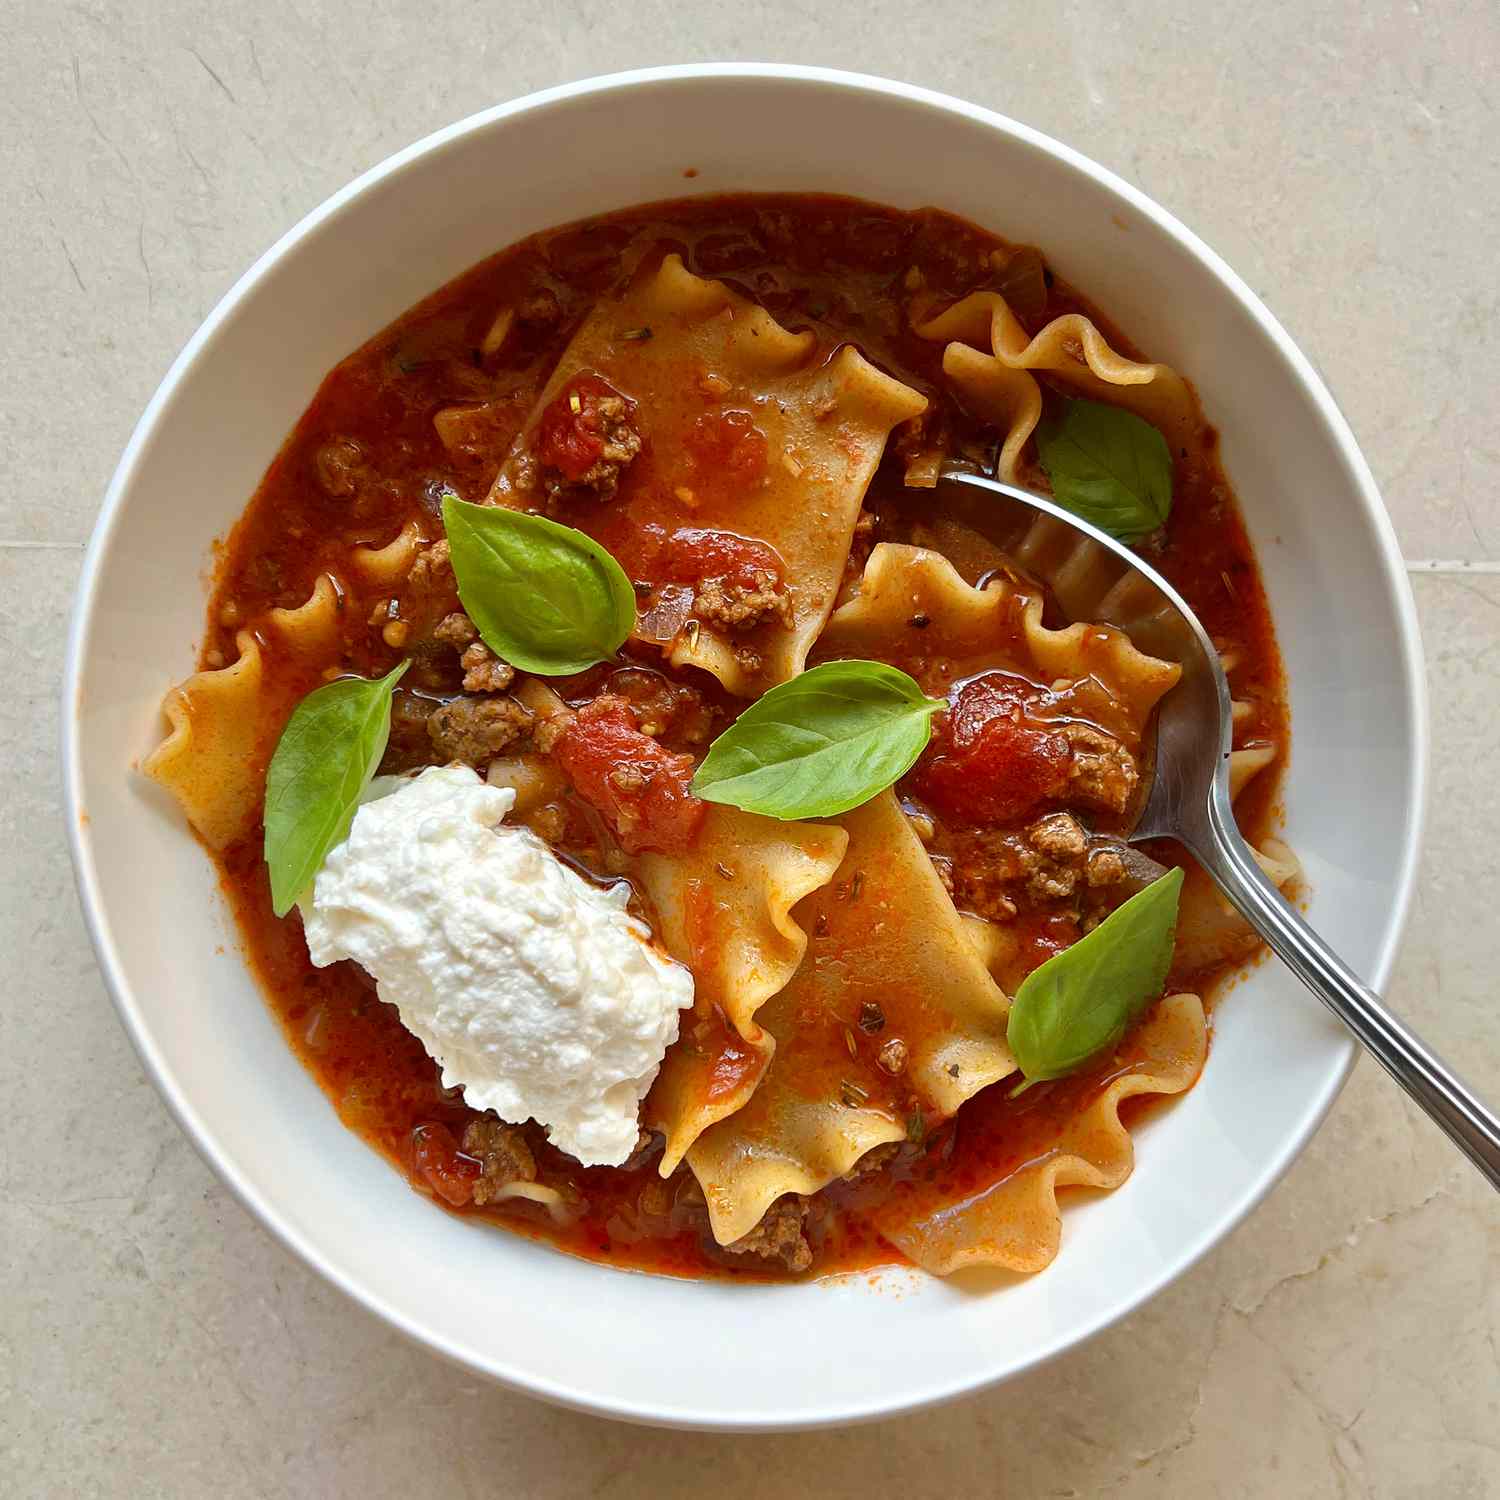 A white bowl filled with a red broth studded with tomato chunks and ground beef, lasagna noodles, and topped with a dollop of ricotta and a few basil leaves